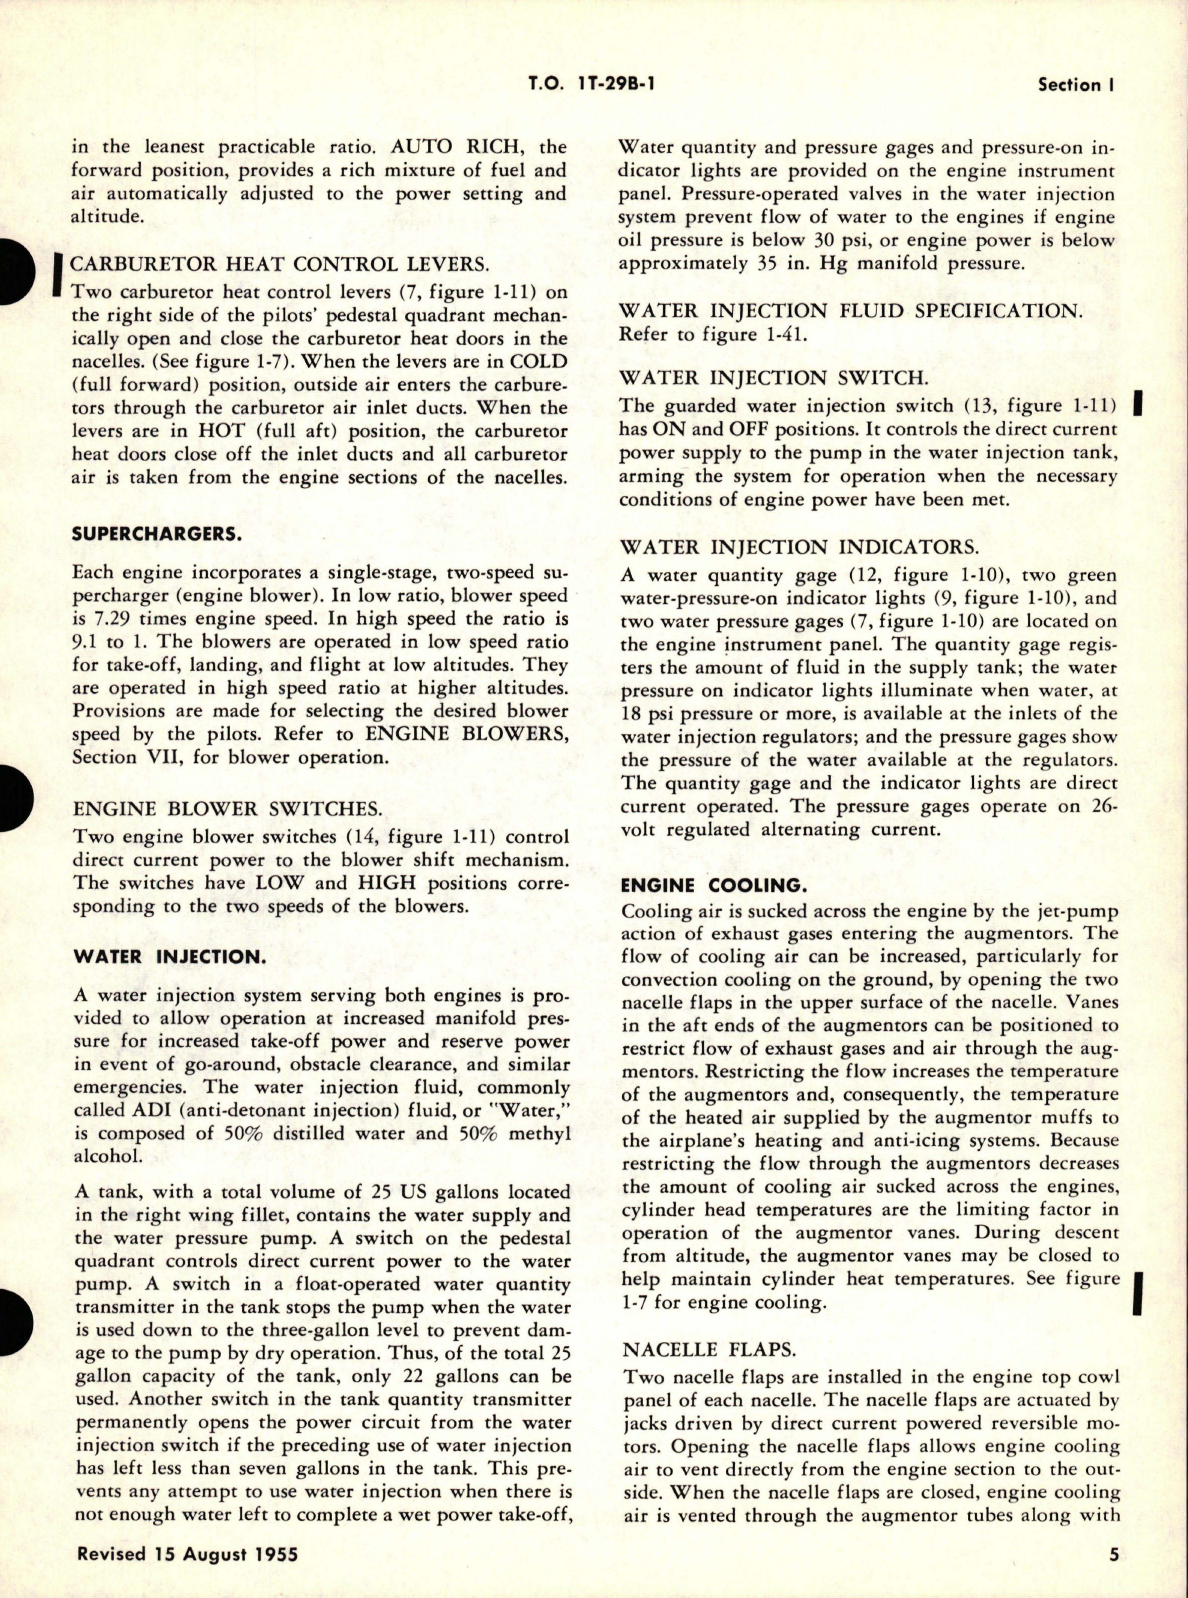 Sample page 7 from AirCorps Library document: Flight Handbook for T-29B